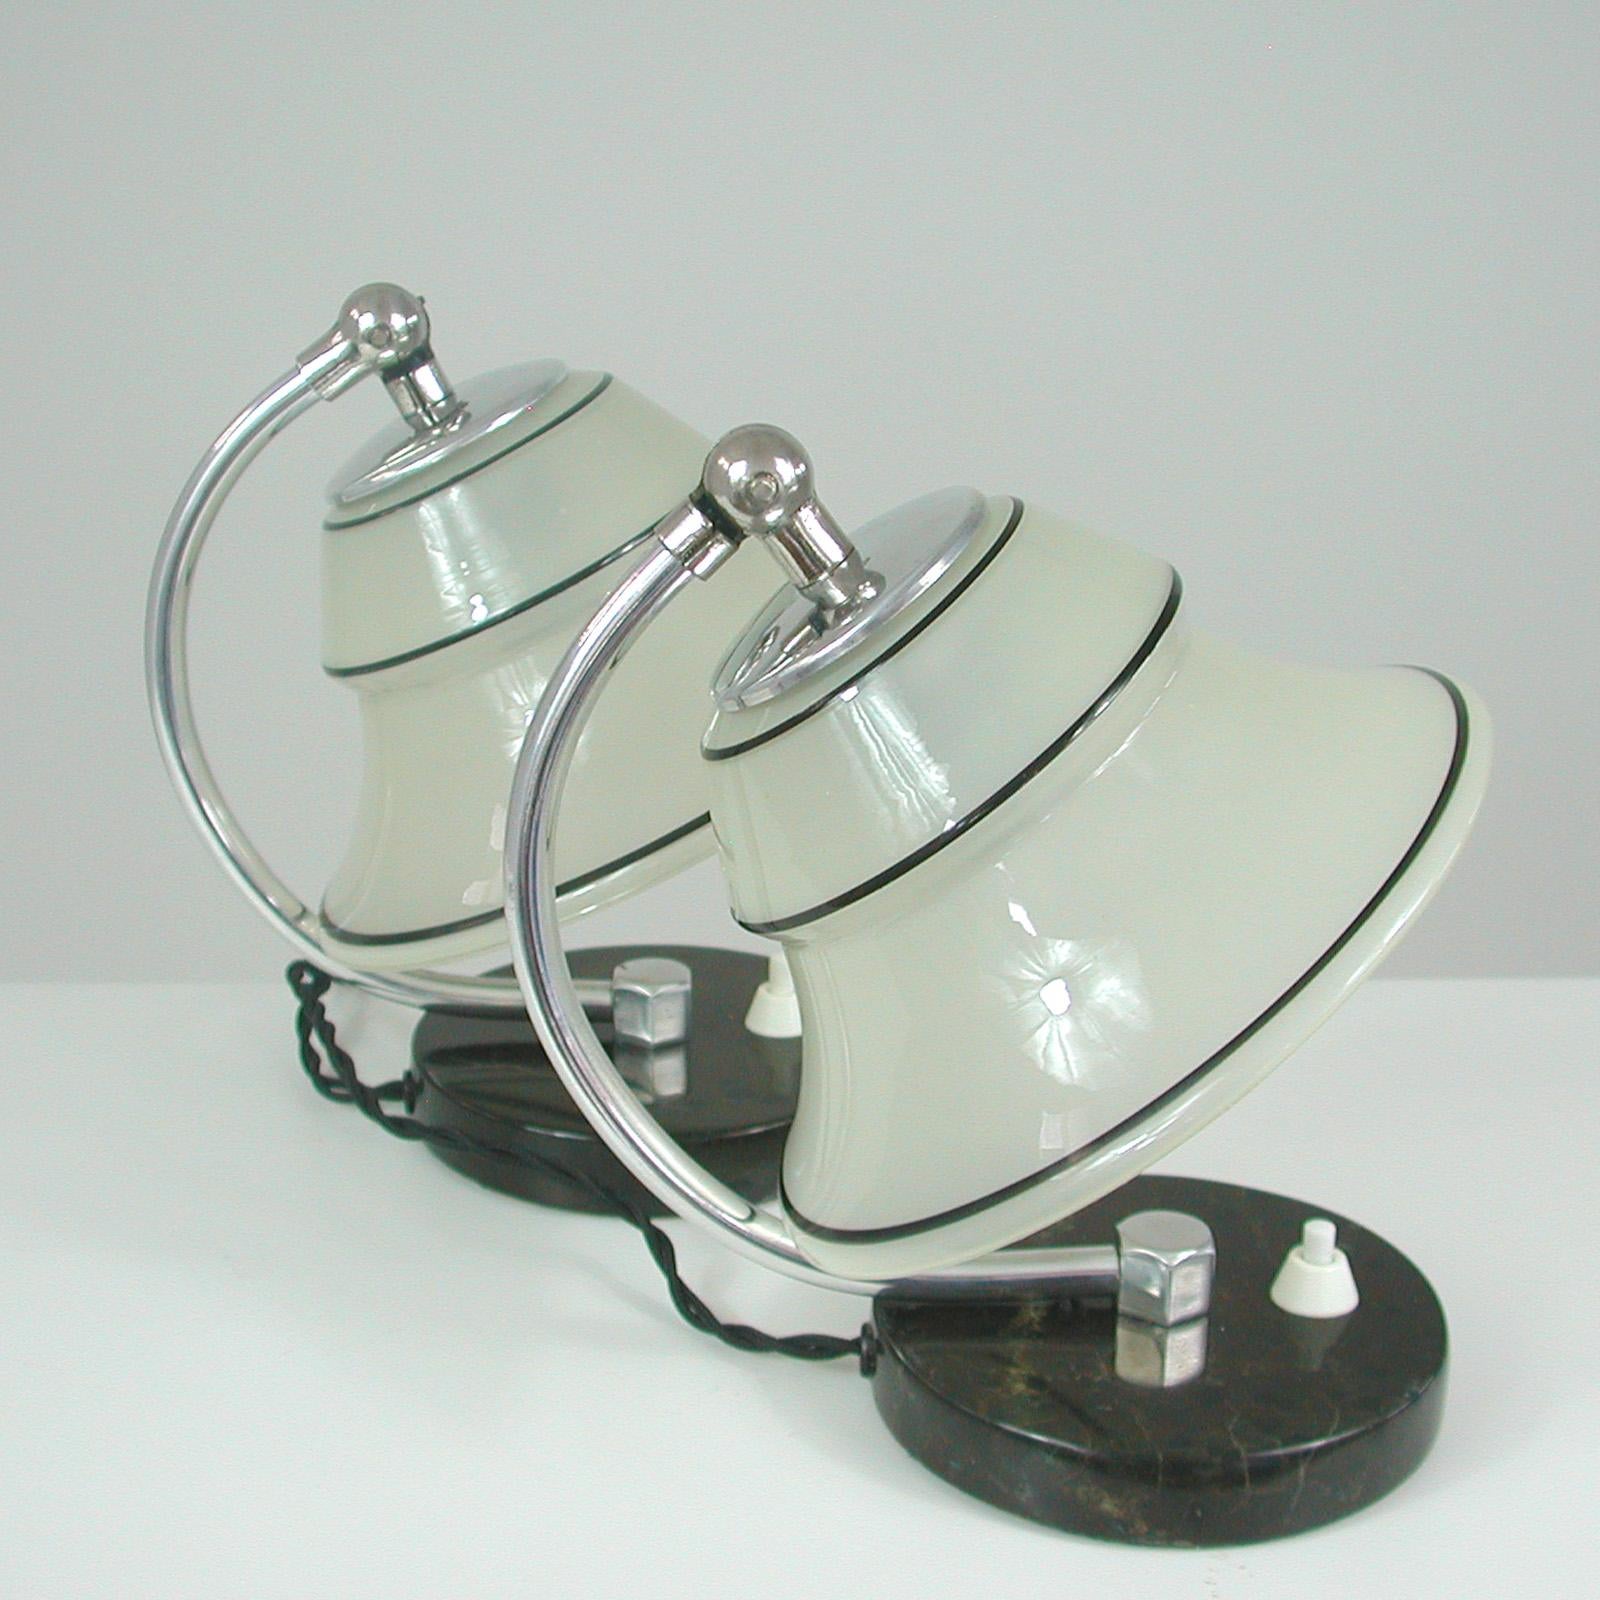 German Art Deco Enameled Satin Glass, Marble and Aluminum Table Lamps, 1930s For Sale 12